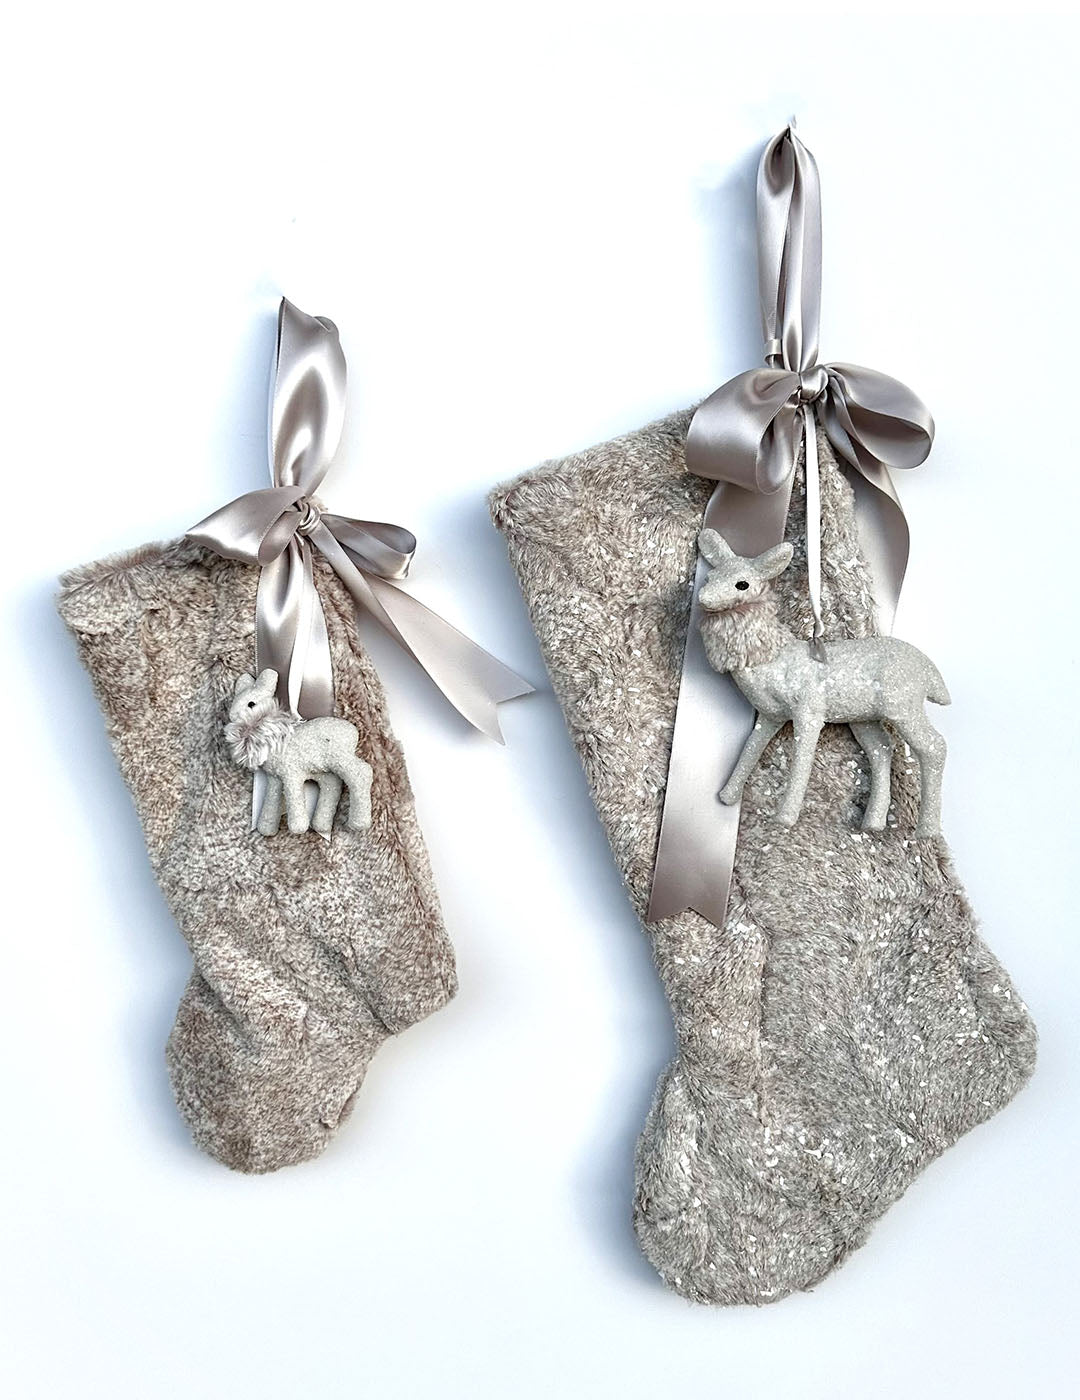 Stocking with Silver Fawn 12" - Small, Oatmeal Fur